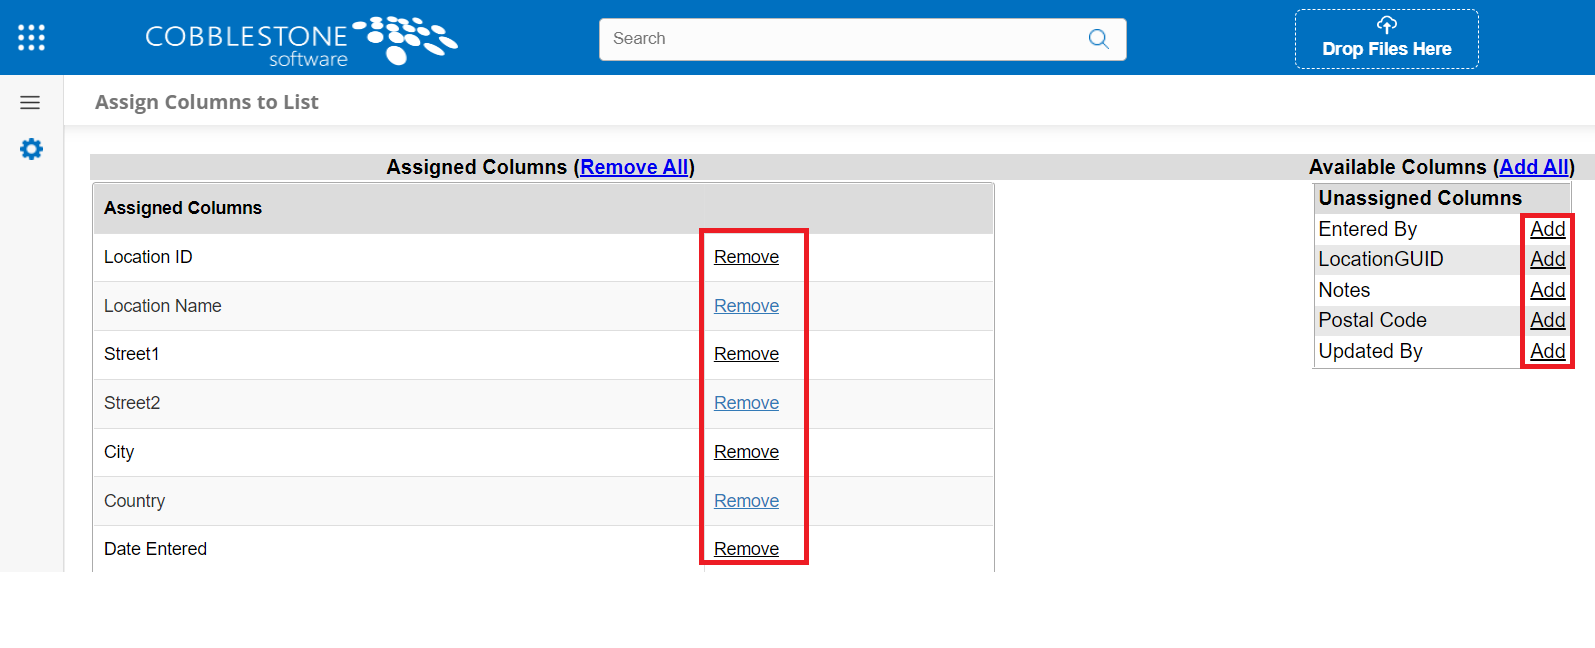 The Assign Columns to List Page. In the Assigned Columns, the Remove option is highlighted. In the Unassigned Columns, Add is highlighted.